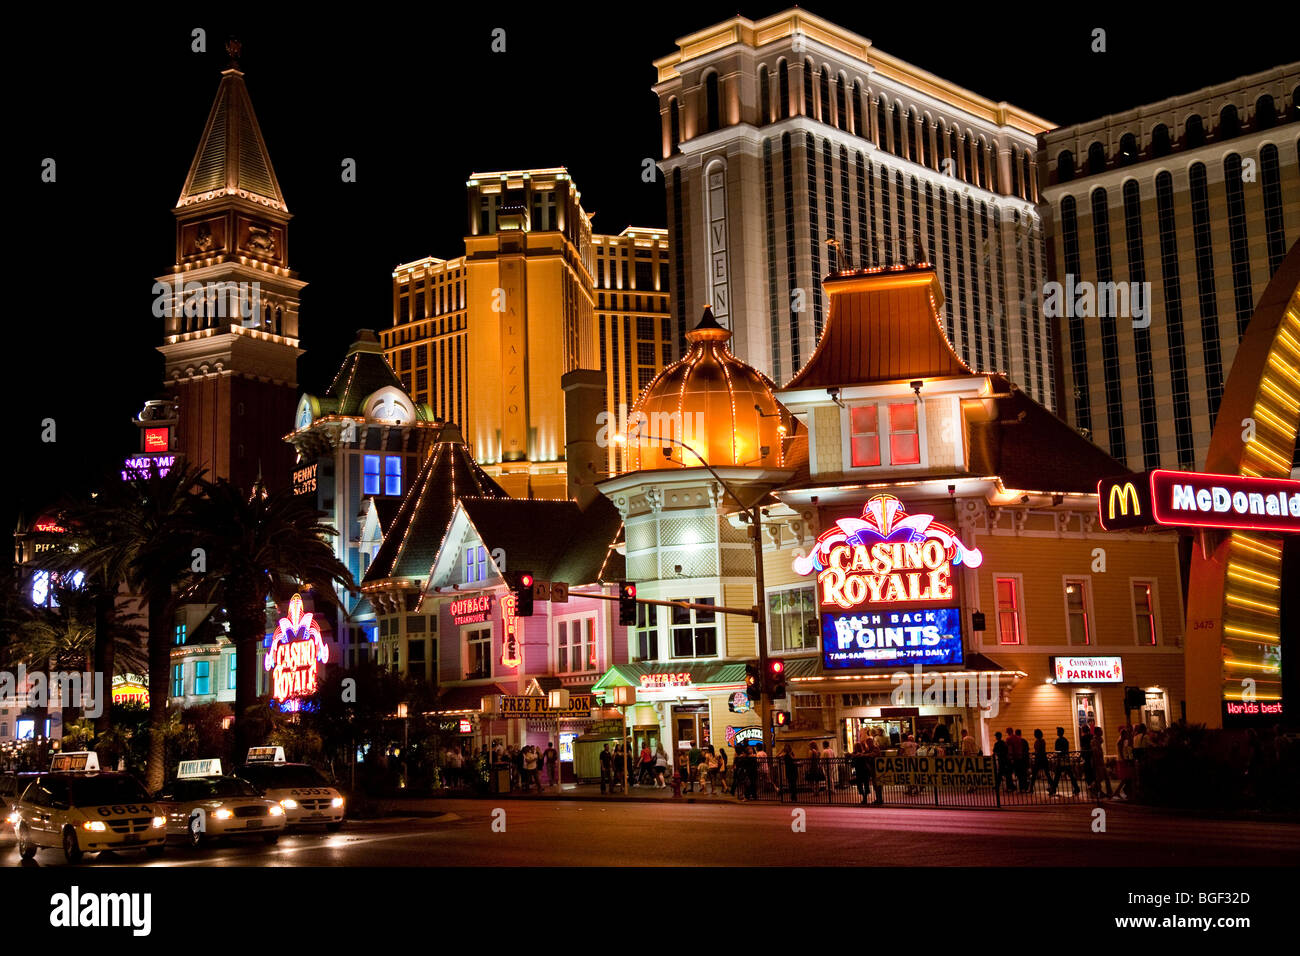 Las Vegas Strip at night with Venetian Hotel, Casino Royale and fast food outlets Stock Photo